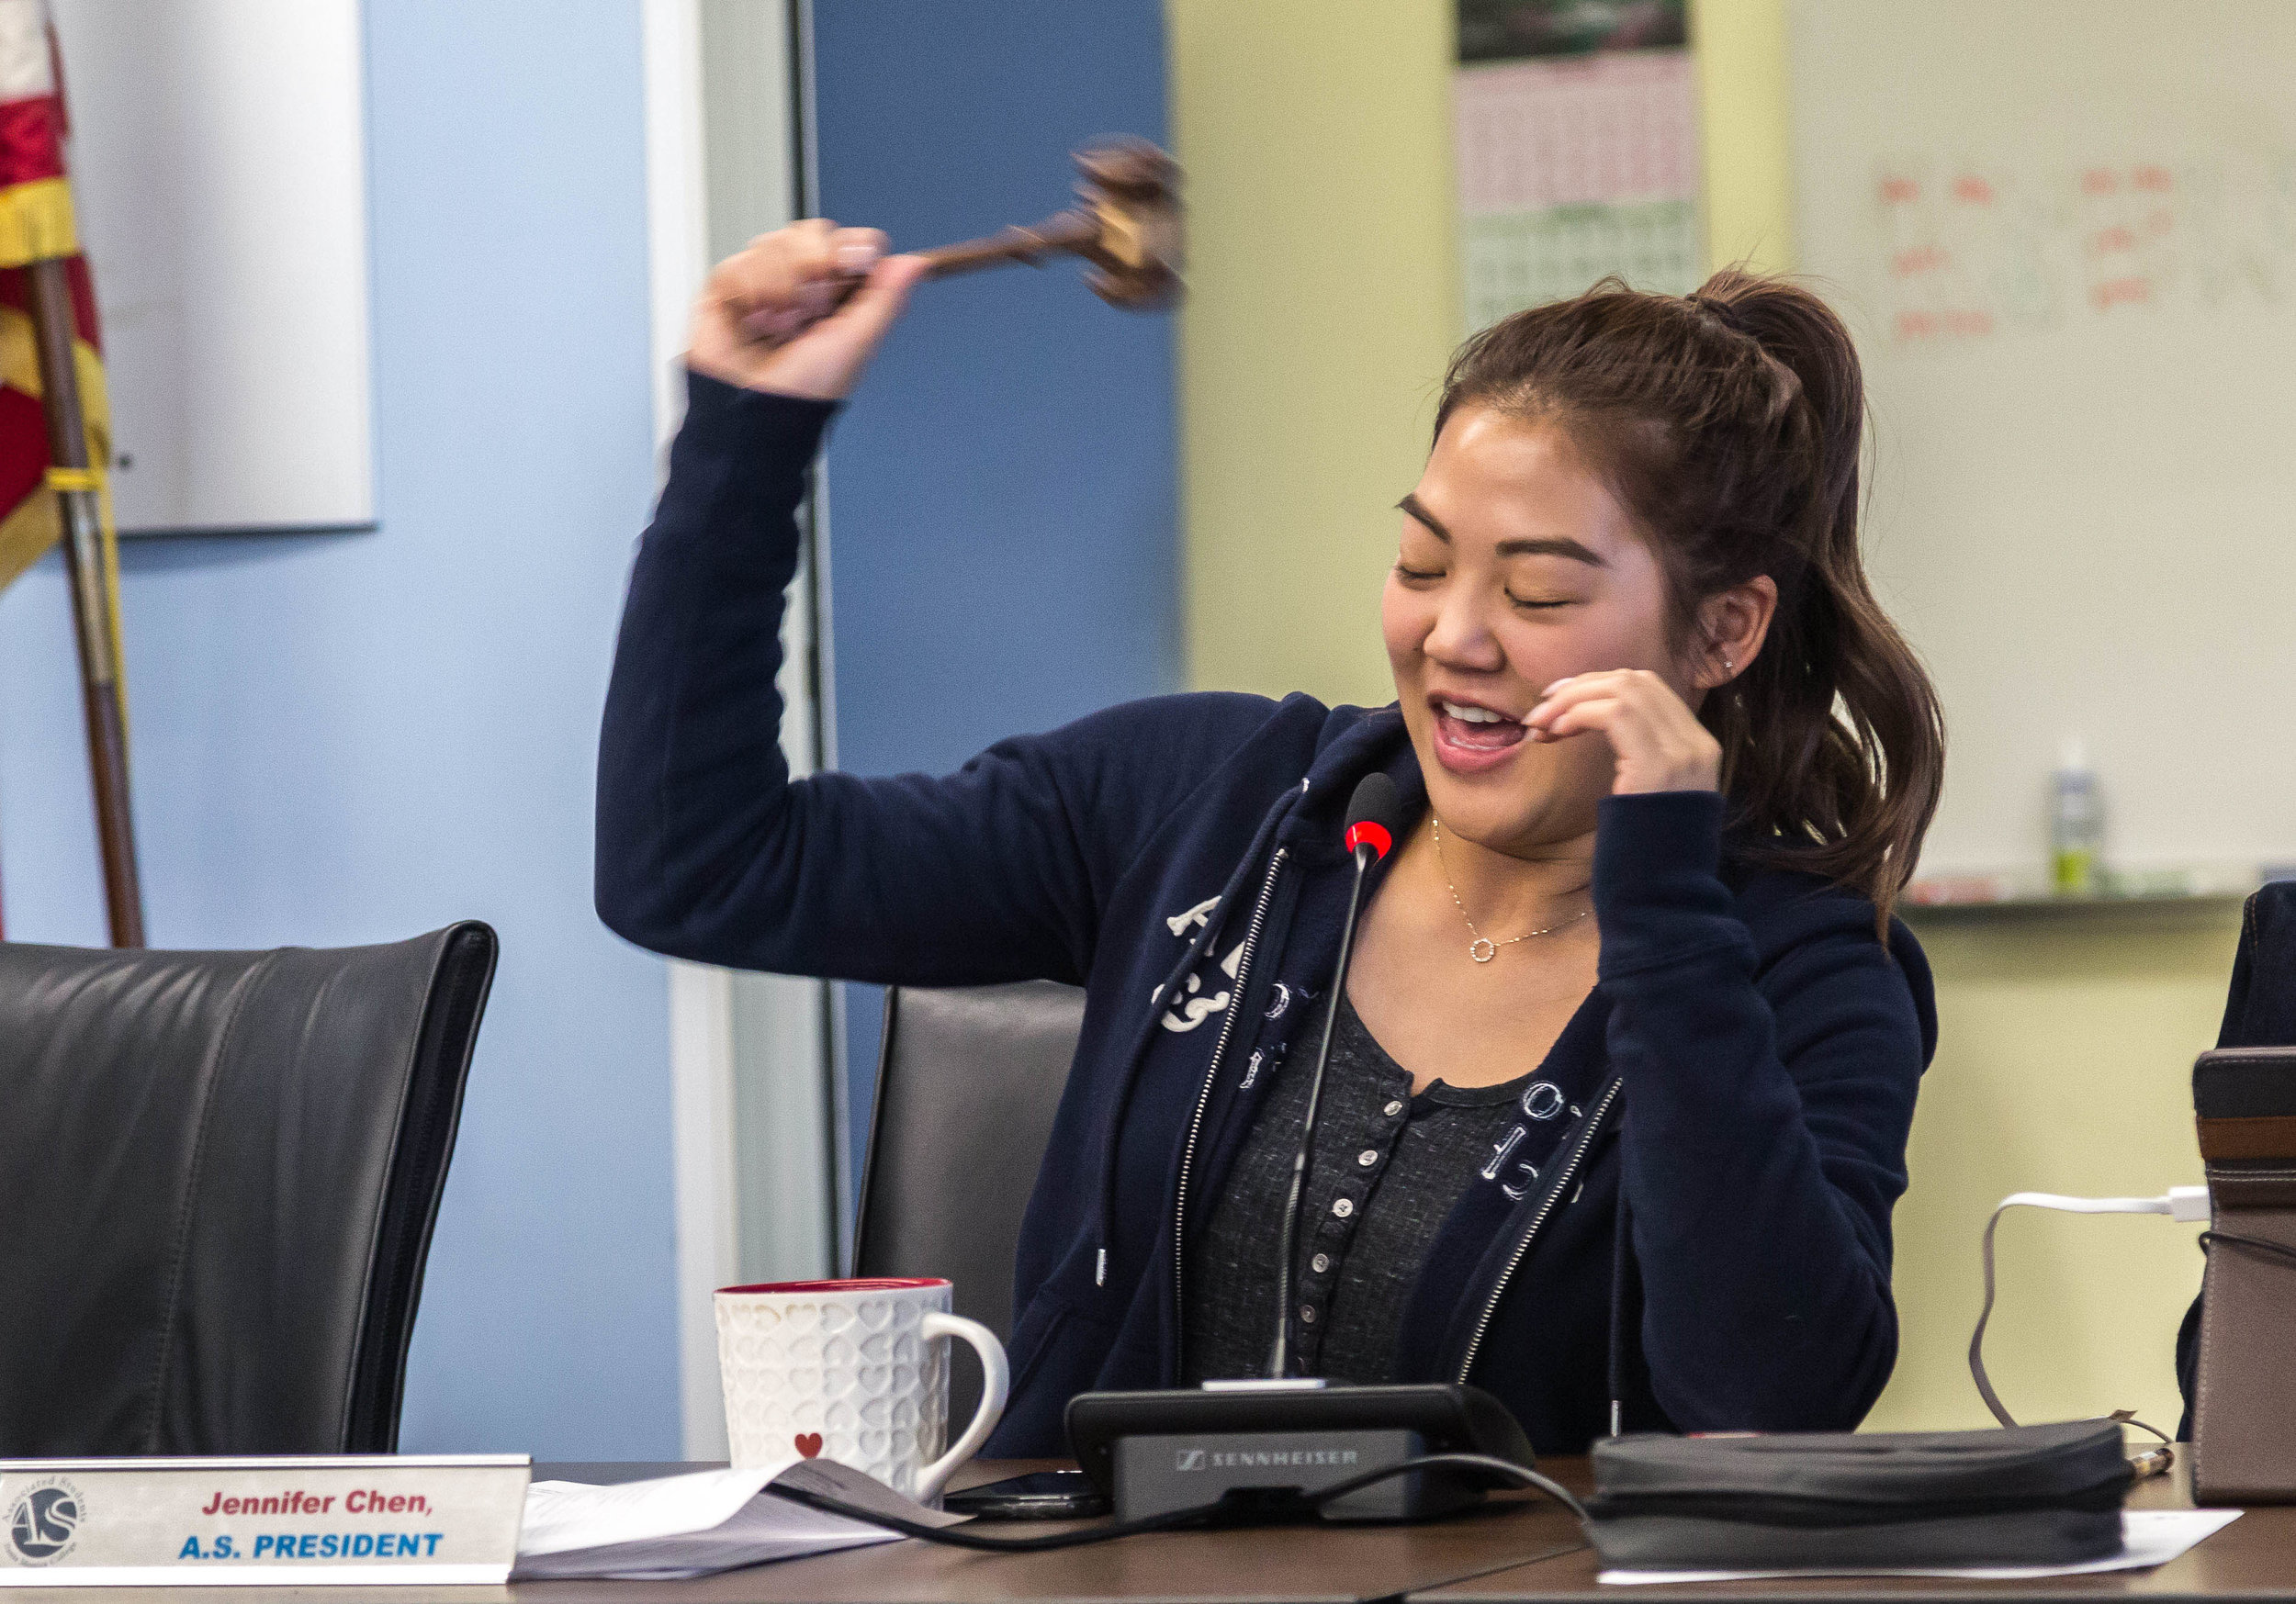  Associated Student Body President Jennifer Chen bangs the gavel to adjourn the A.S Board of Directors meeting at precisely 4:22pm during the Associated Students Board of Directors meeting in the Cayton Center Lounge on the Santa Monica College main 